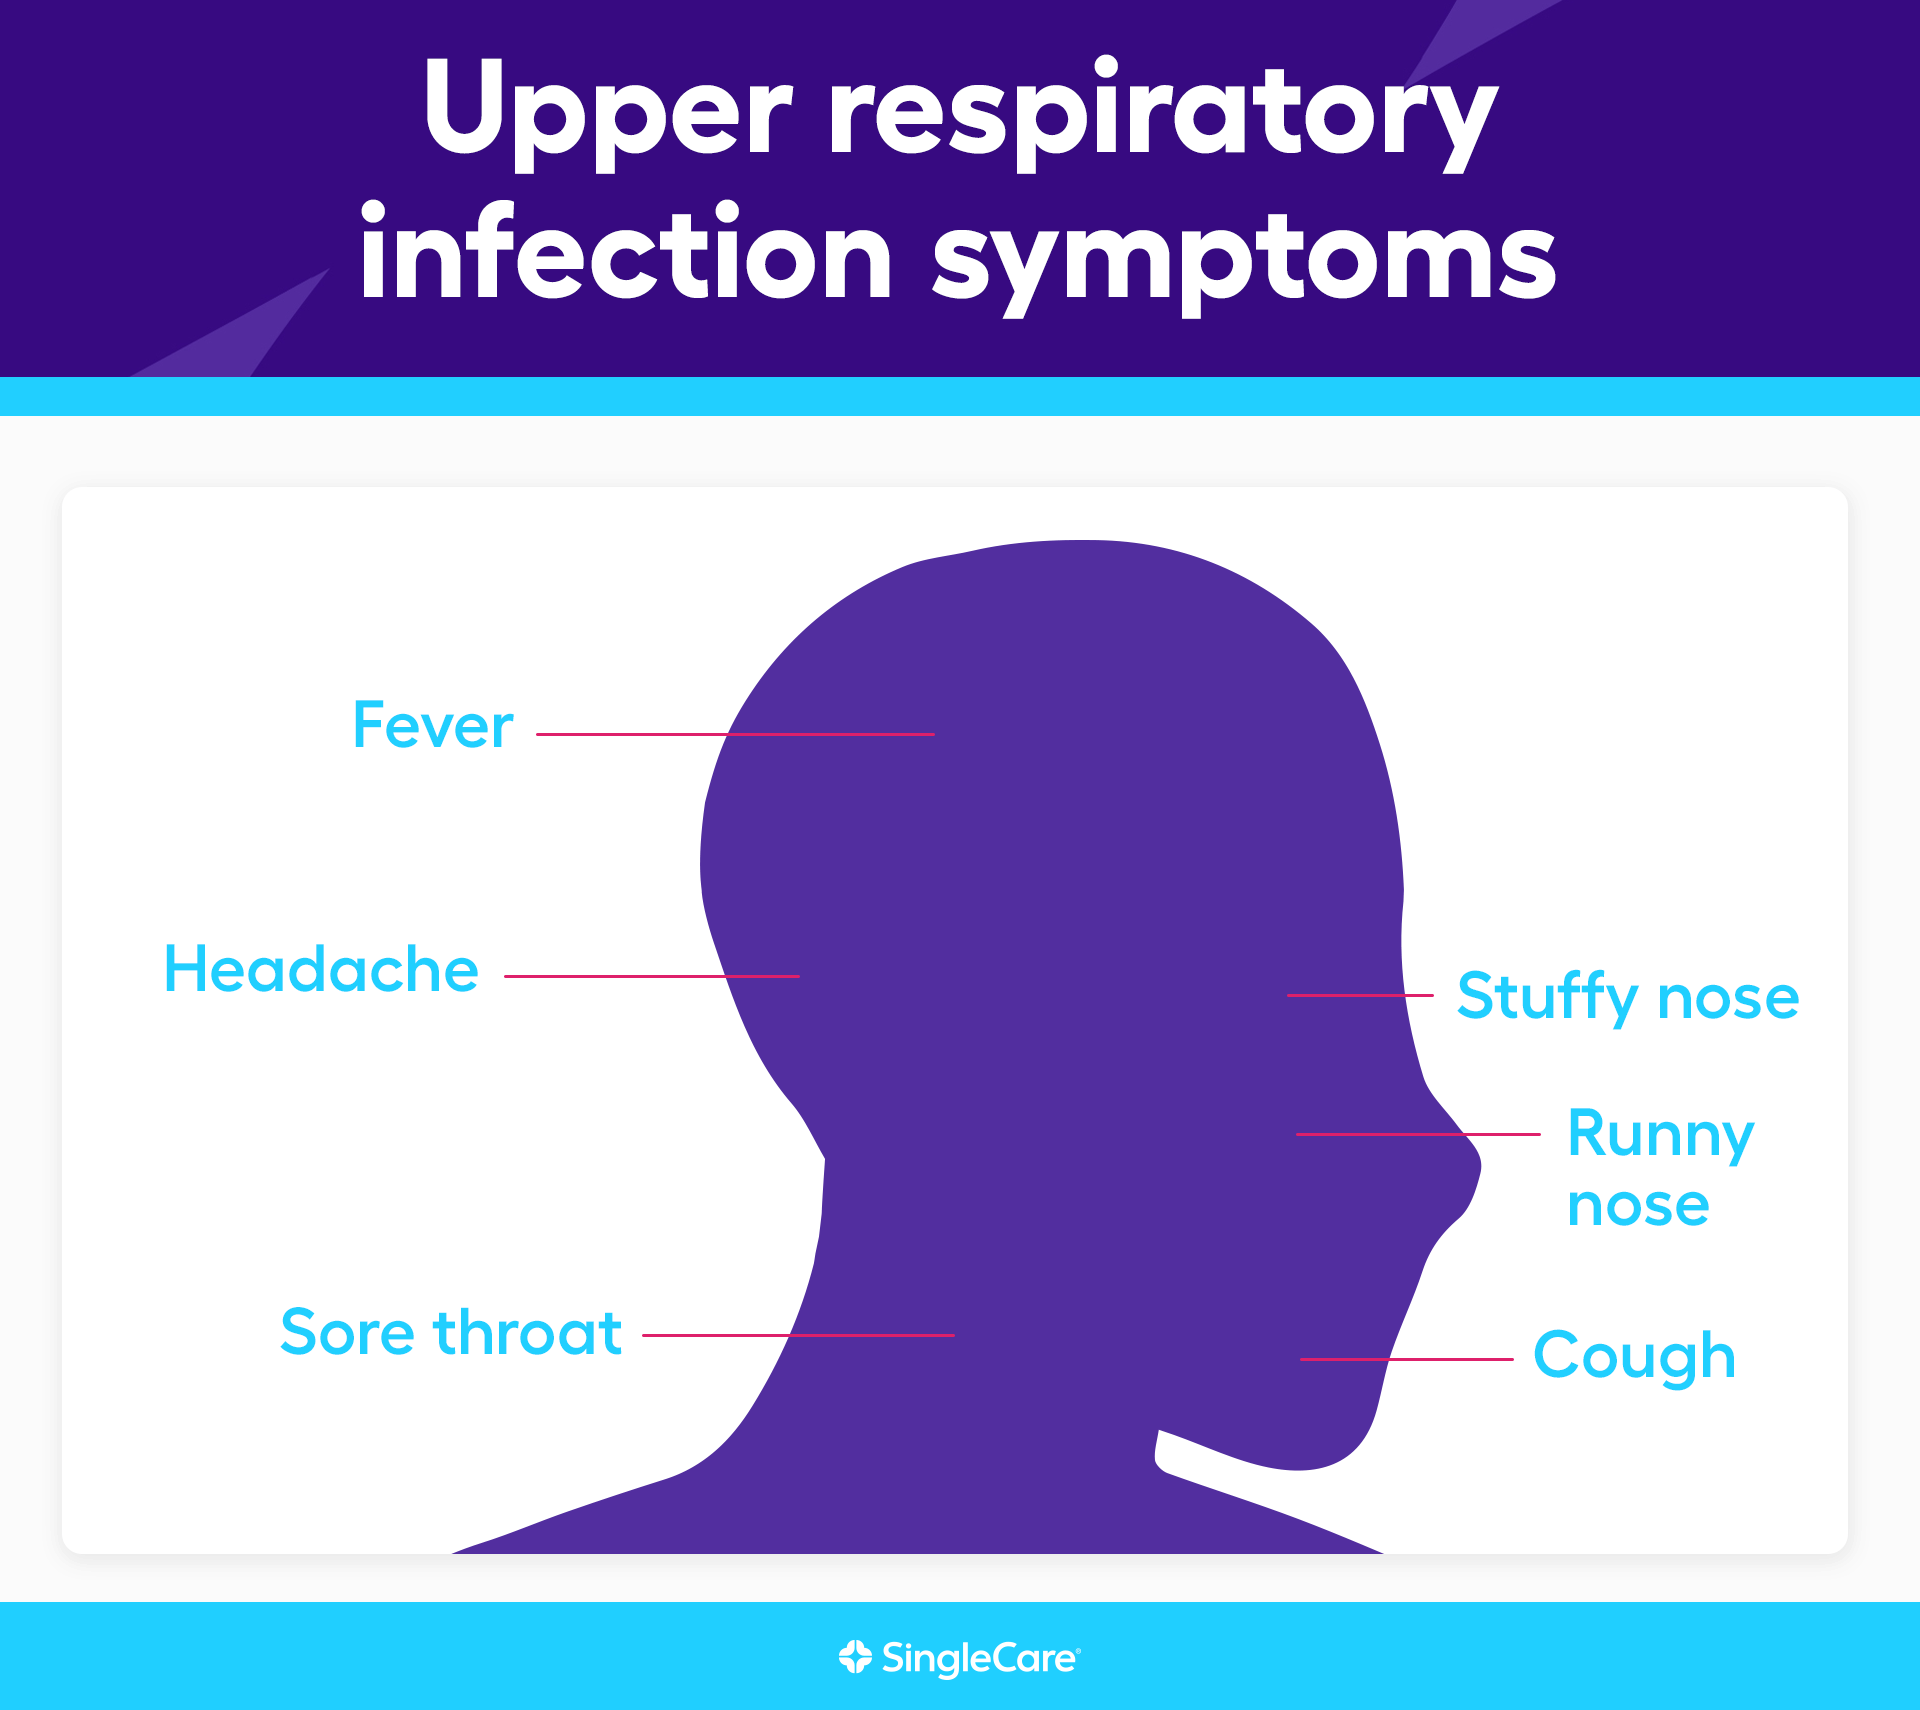 Symptoms of upper respiratory infections